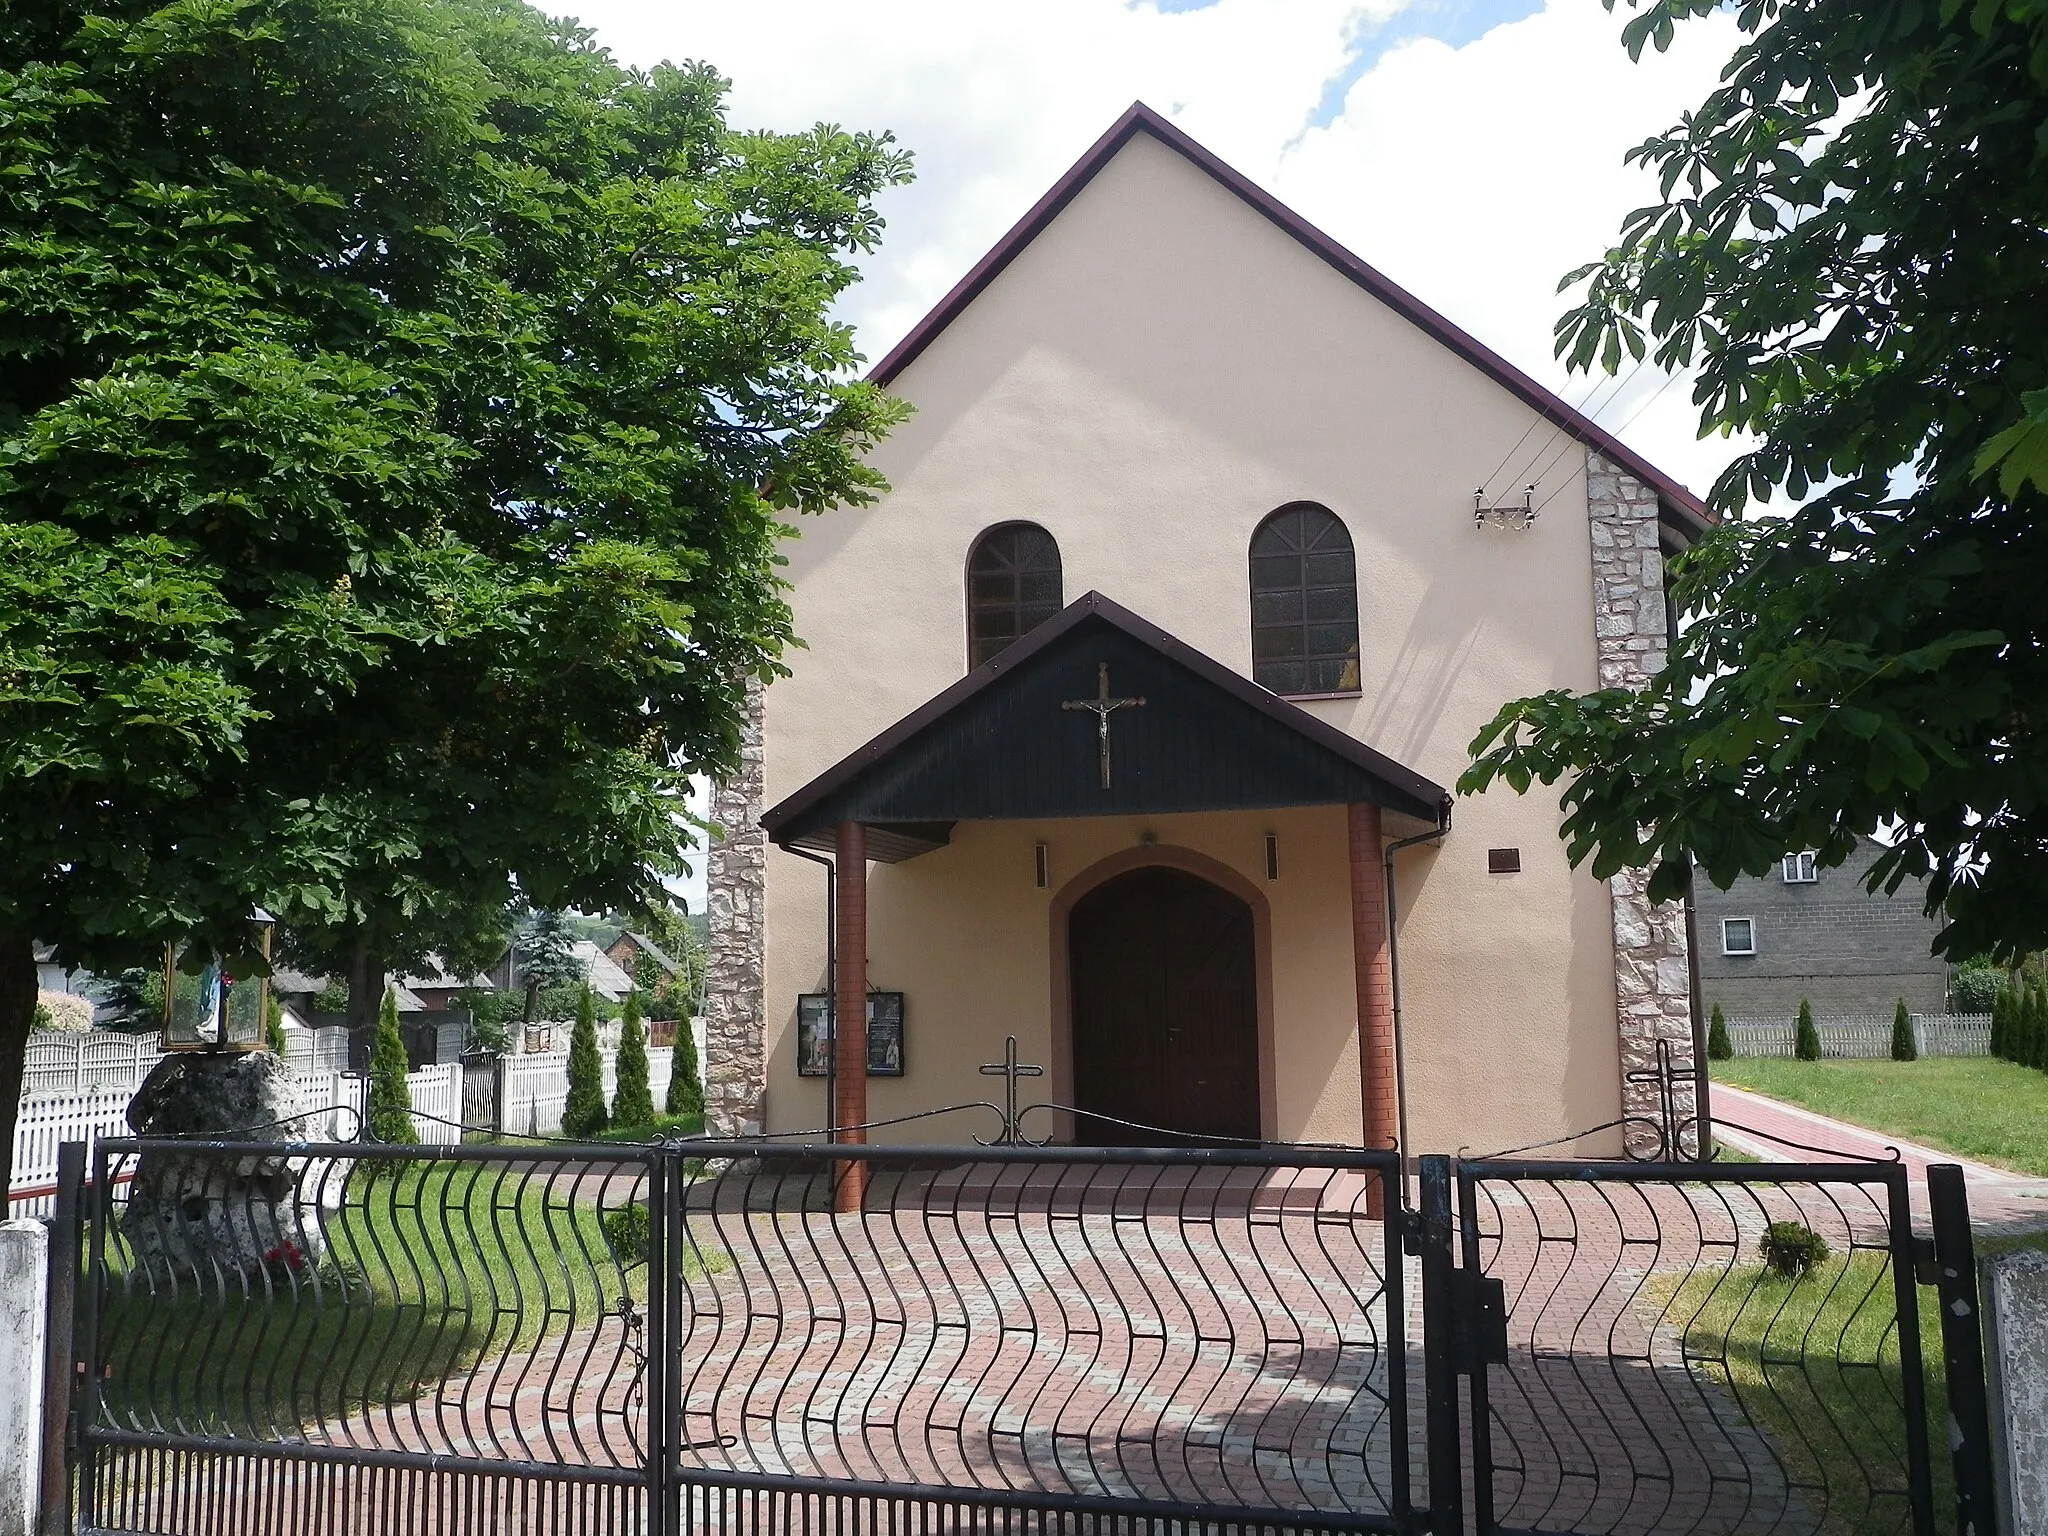 Photo showing: A chapel in Zdów, Poland